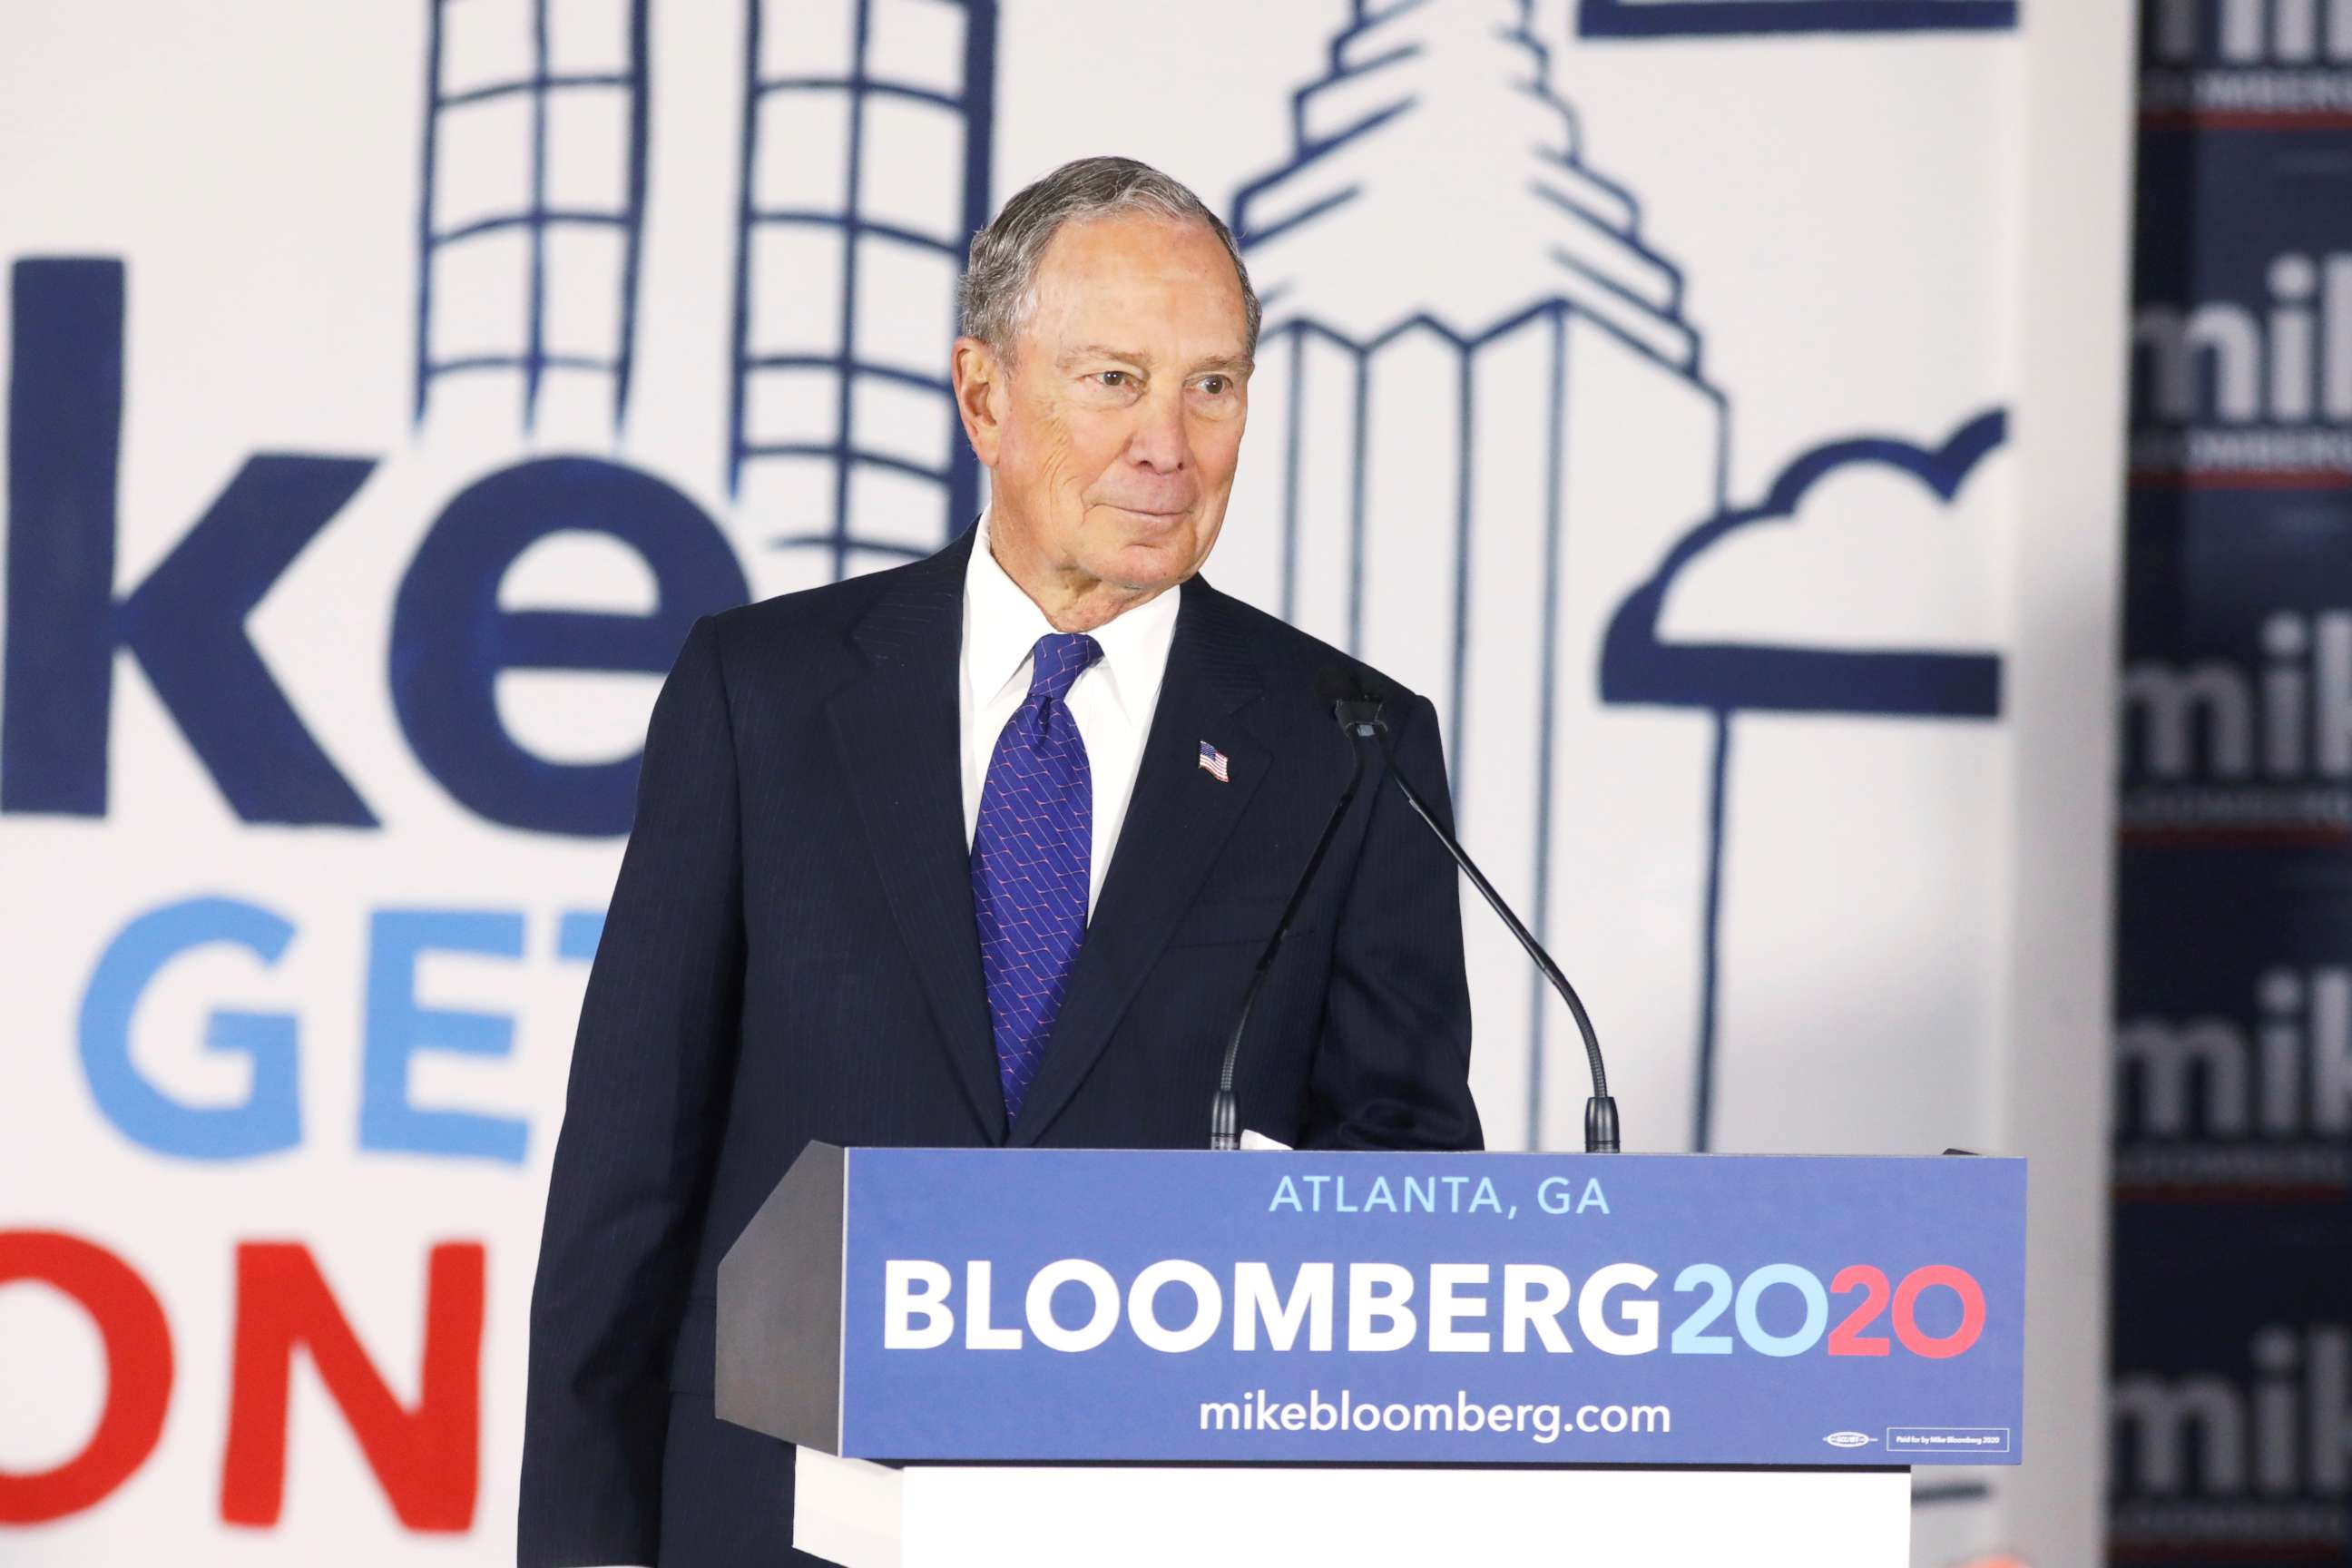 PHOTO: Democratic presidential candidate Mike Bloomberg prepares to leave the stage after speaking at an organizing event in Atlanta on Jan. 10, 2020.